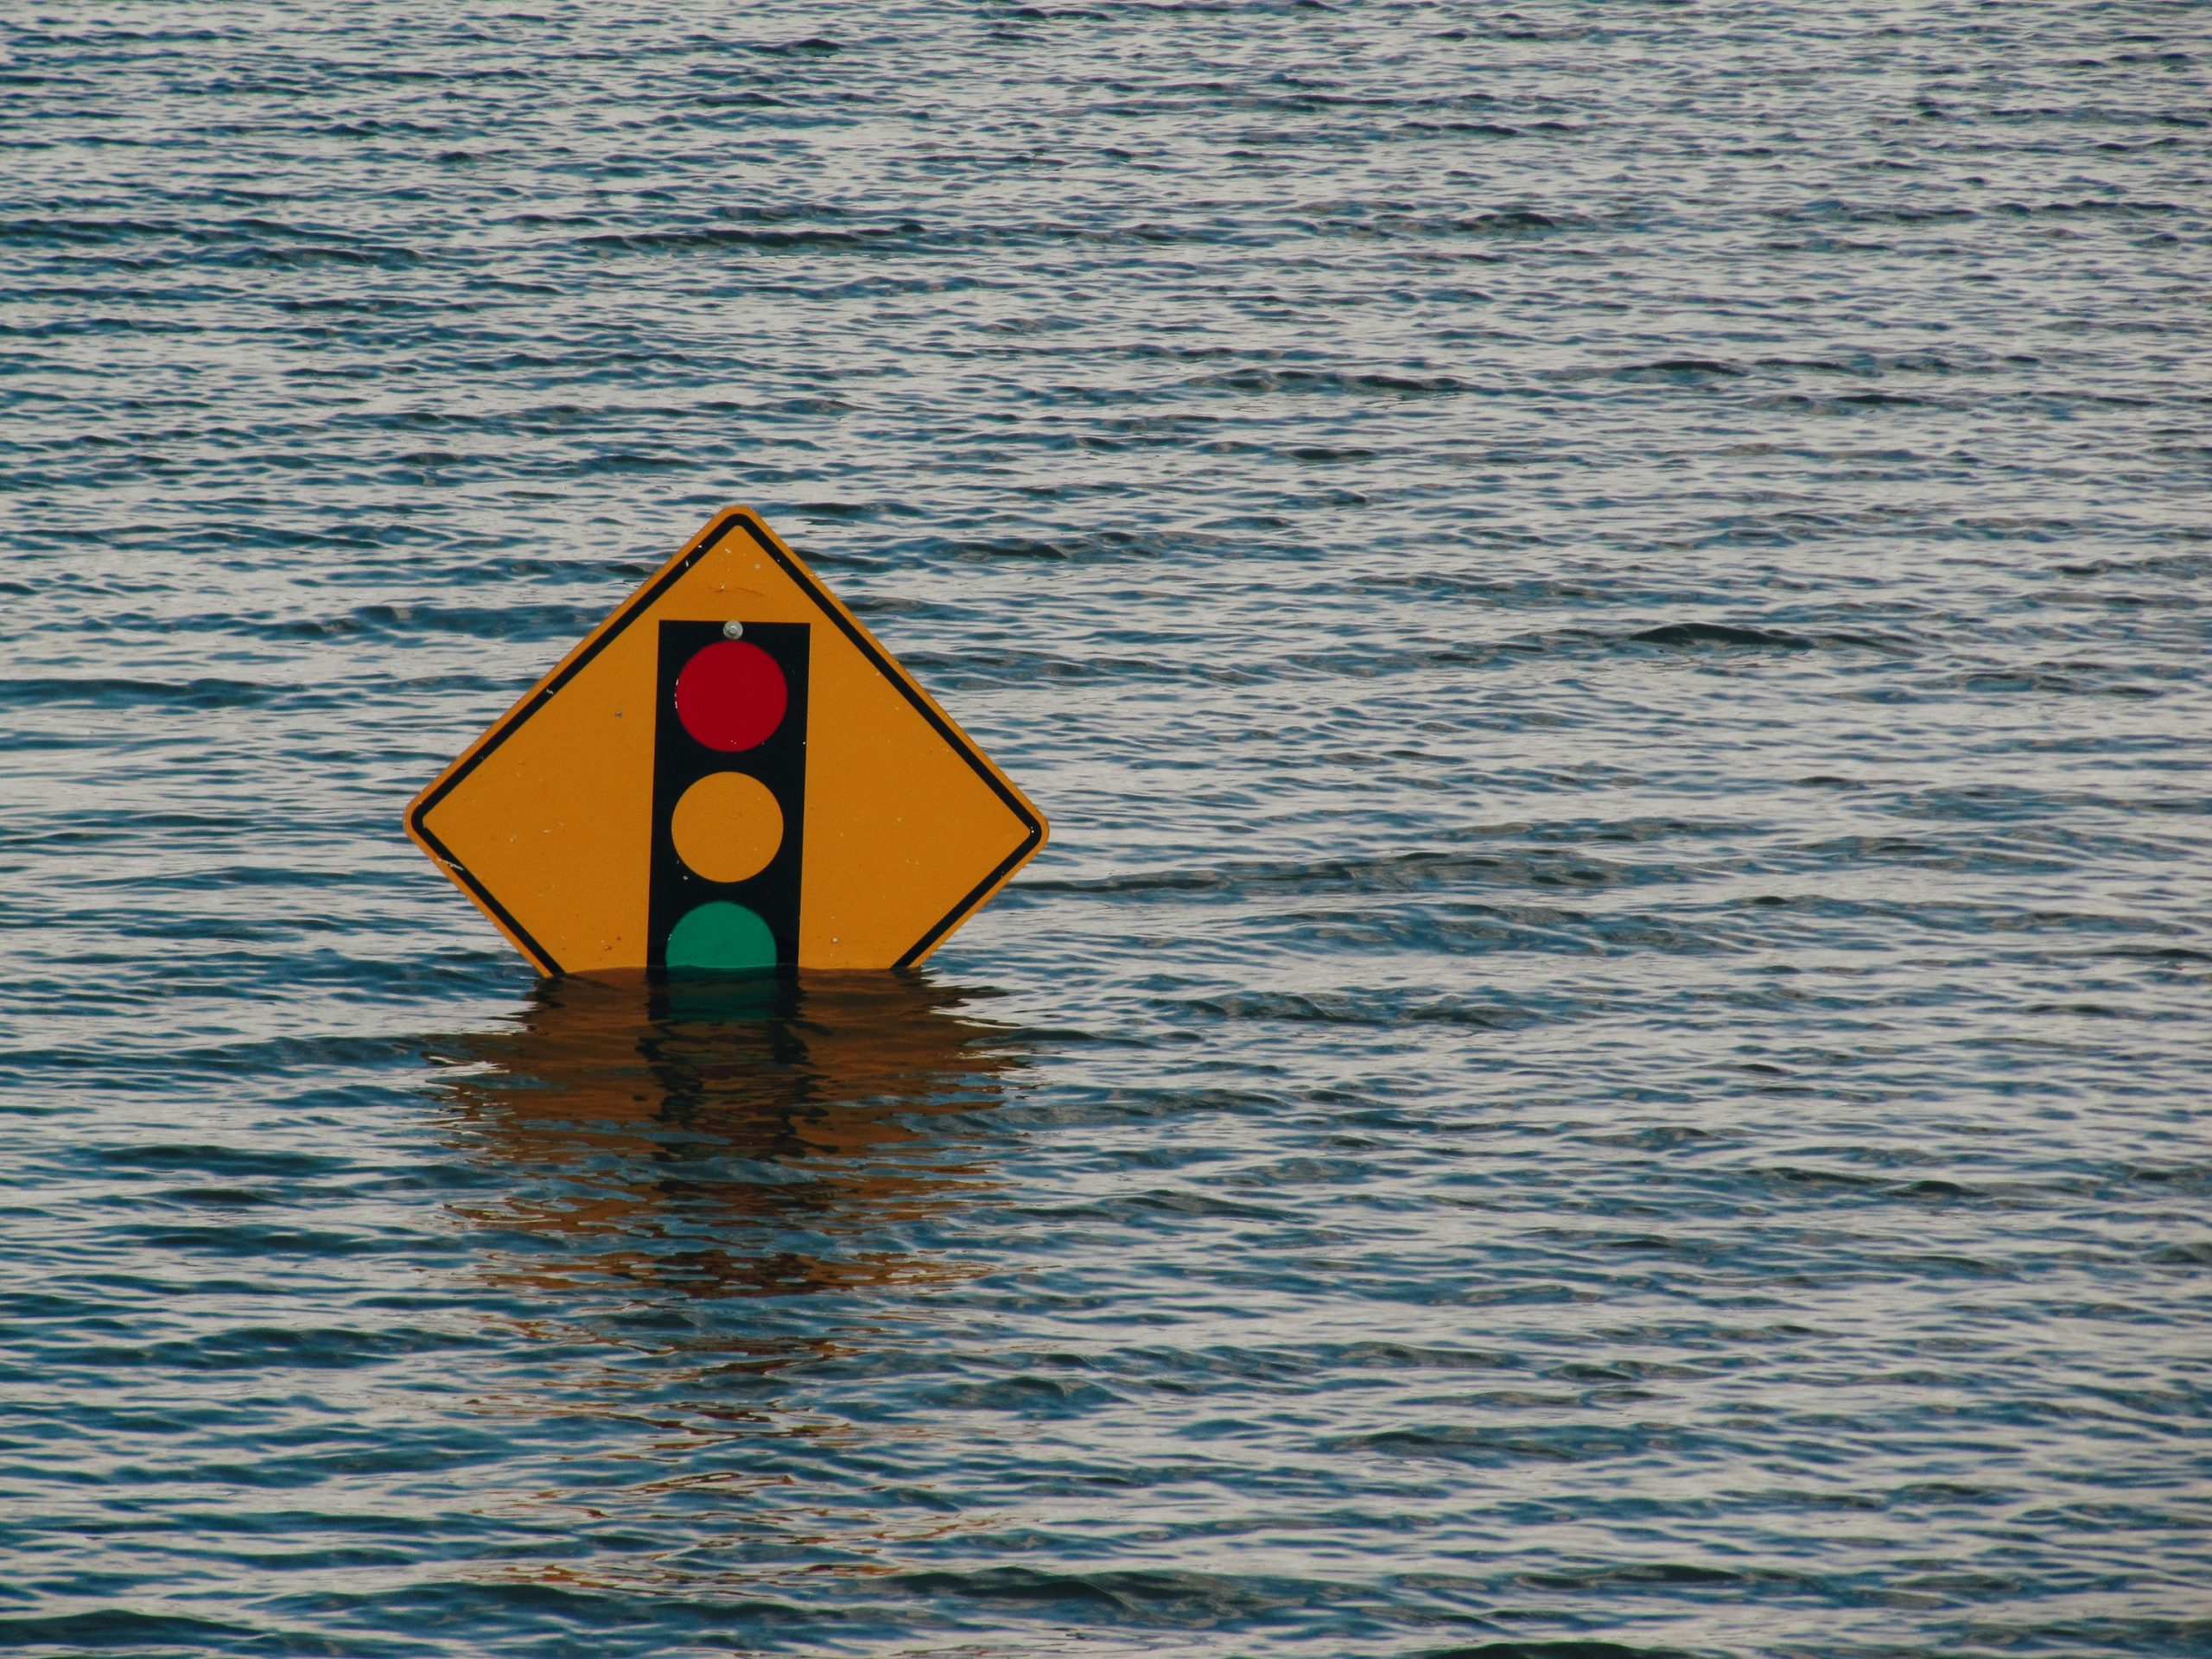 stop light ahead sign in water due to flooding